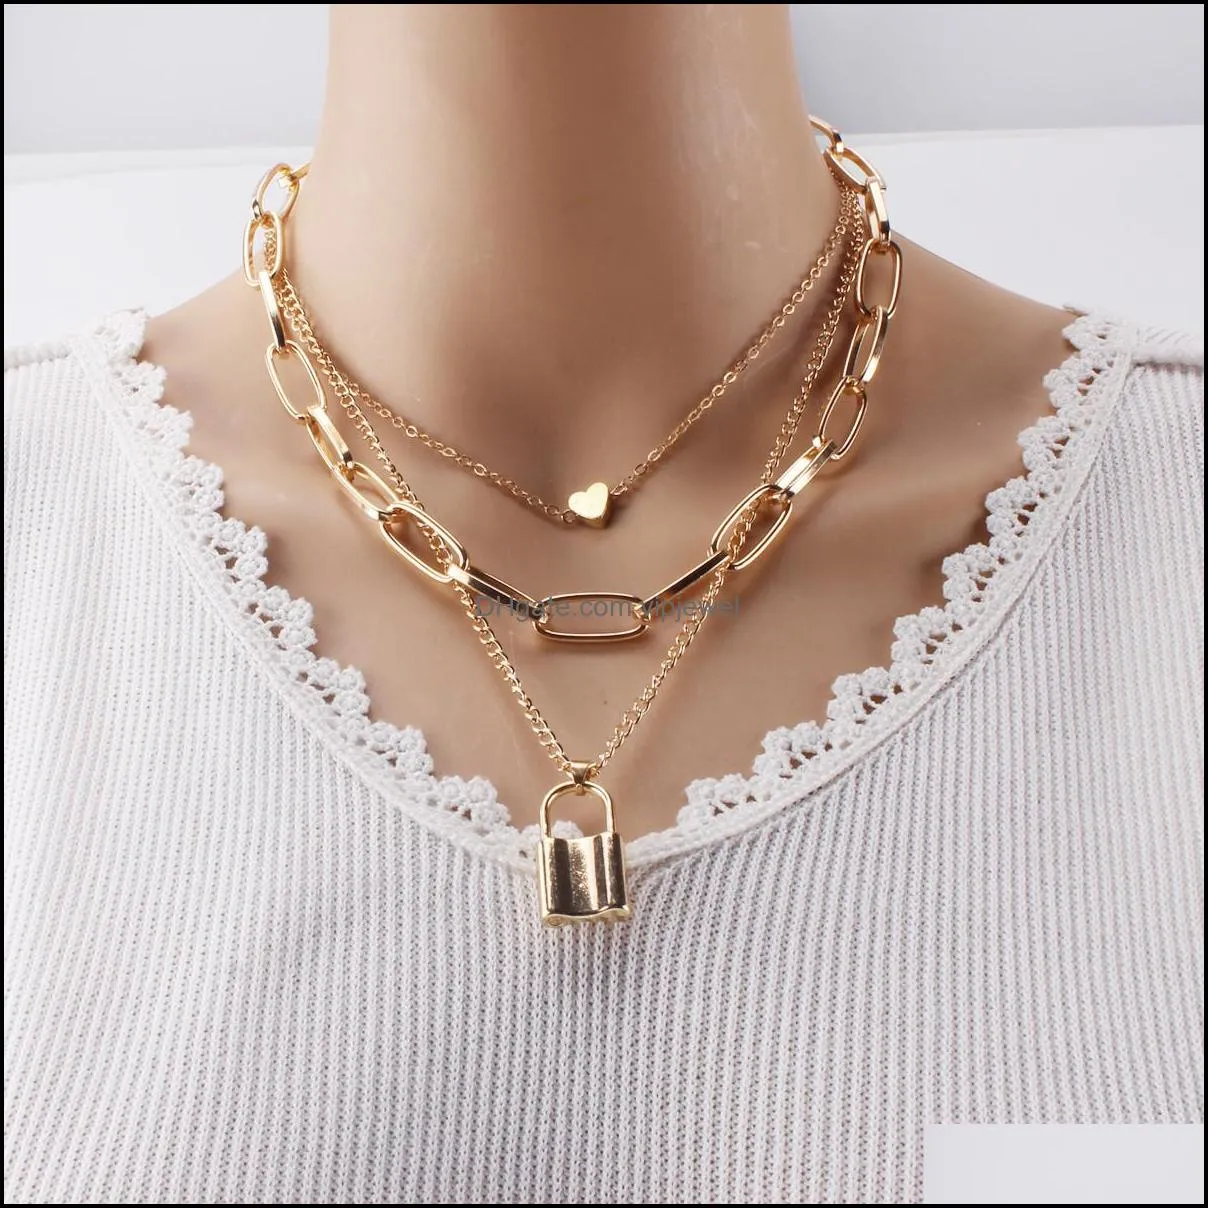 hip hop lock heart pendant necklace chokers silver gold chains multilayer wrap collar necklaces for women fashion jewelry